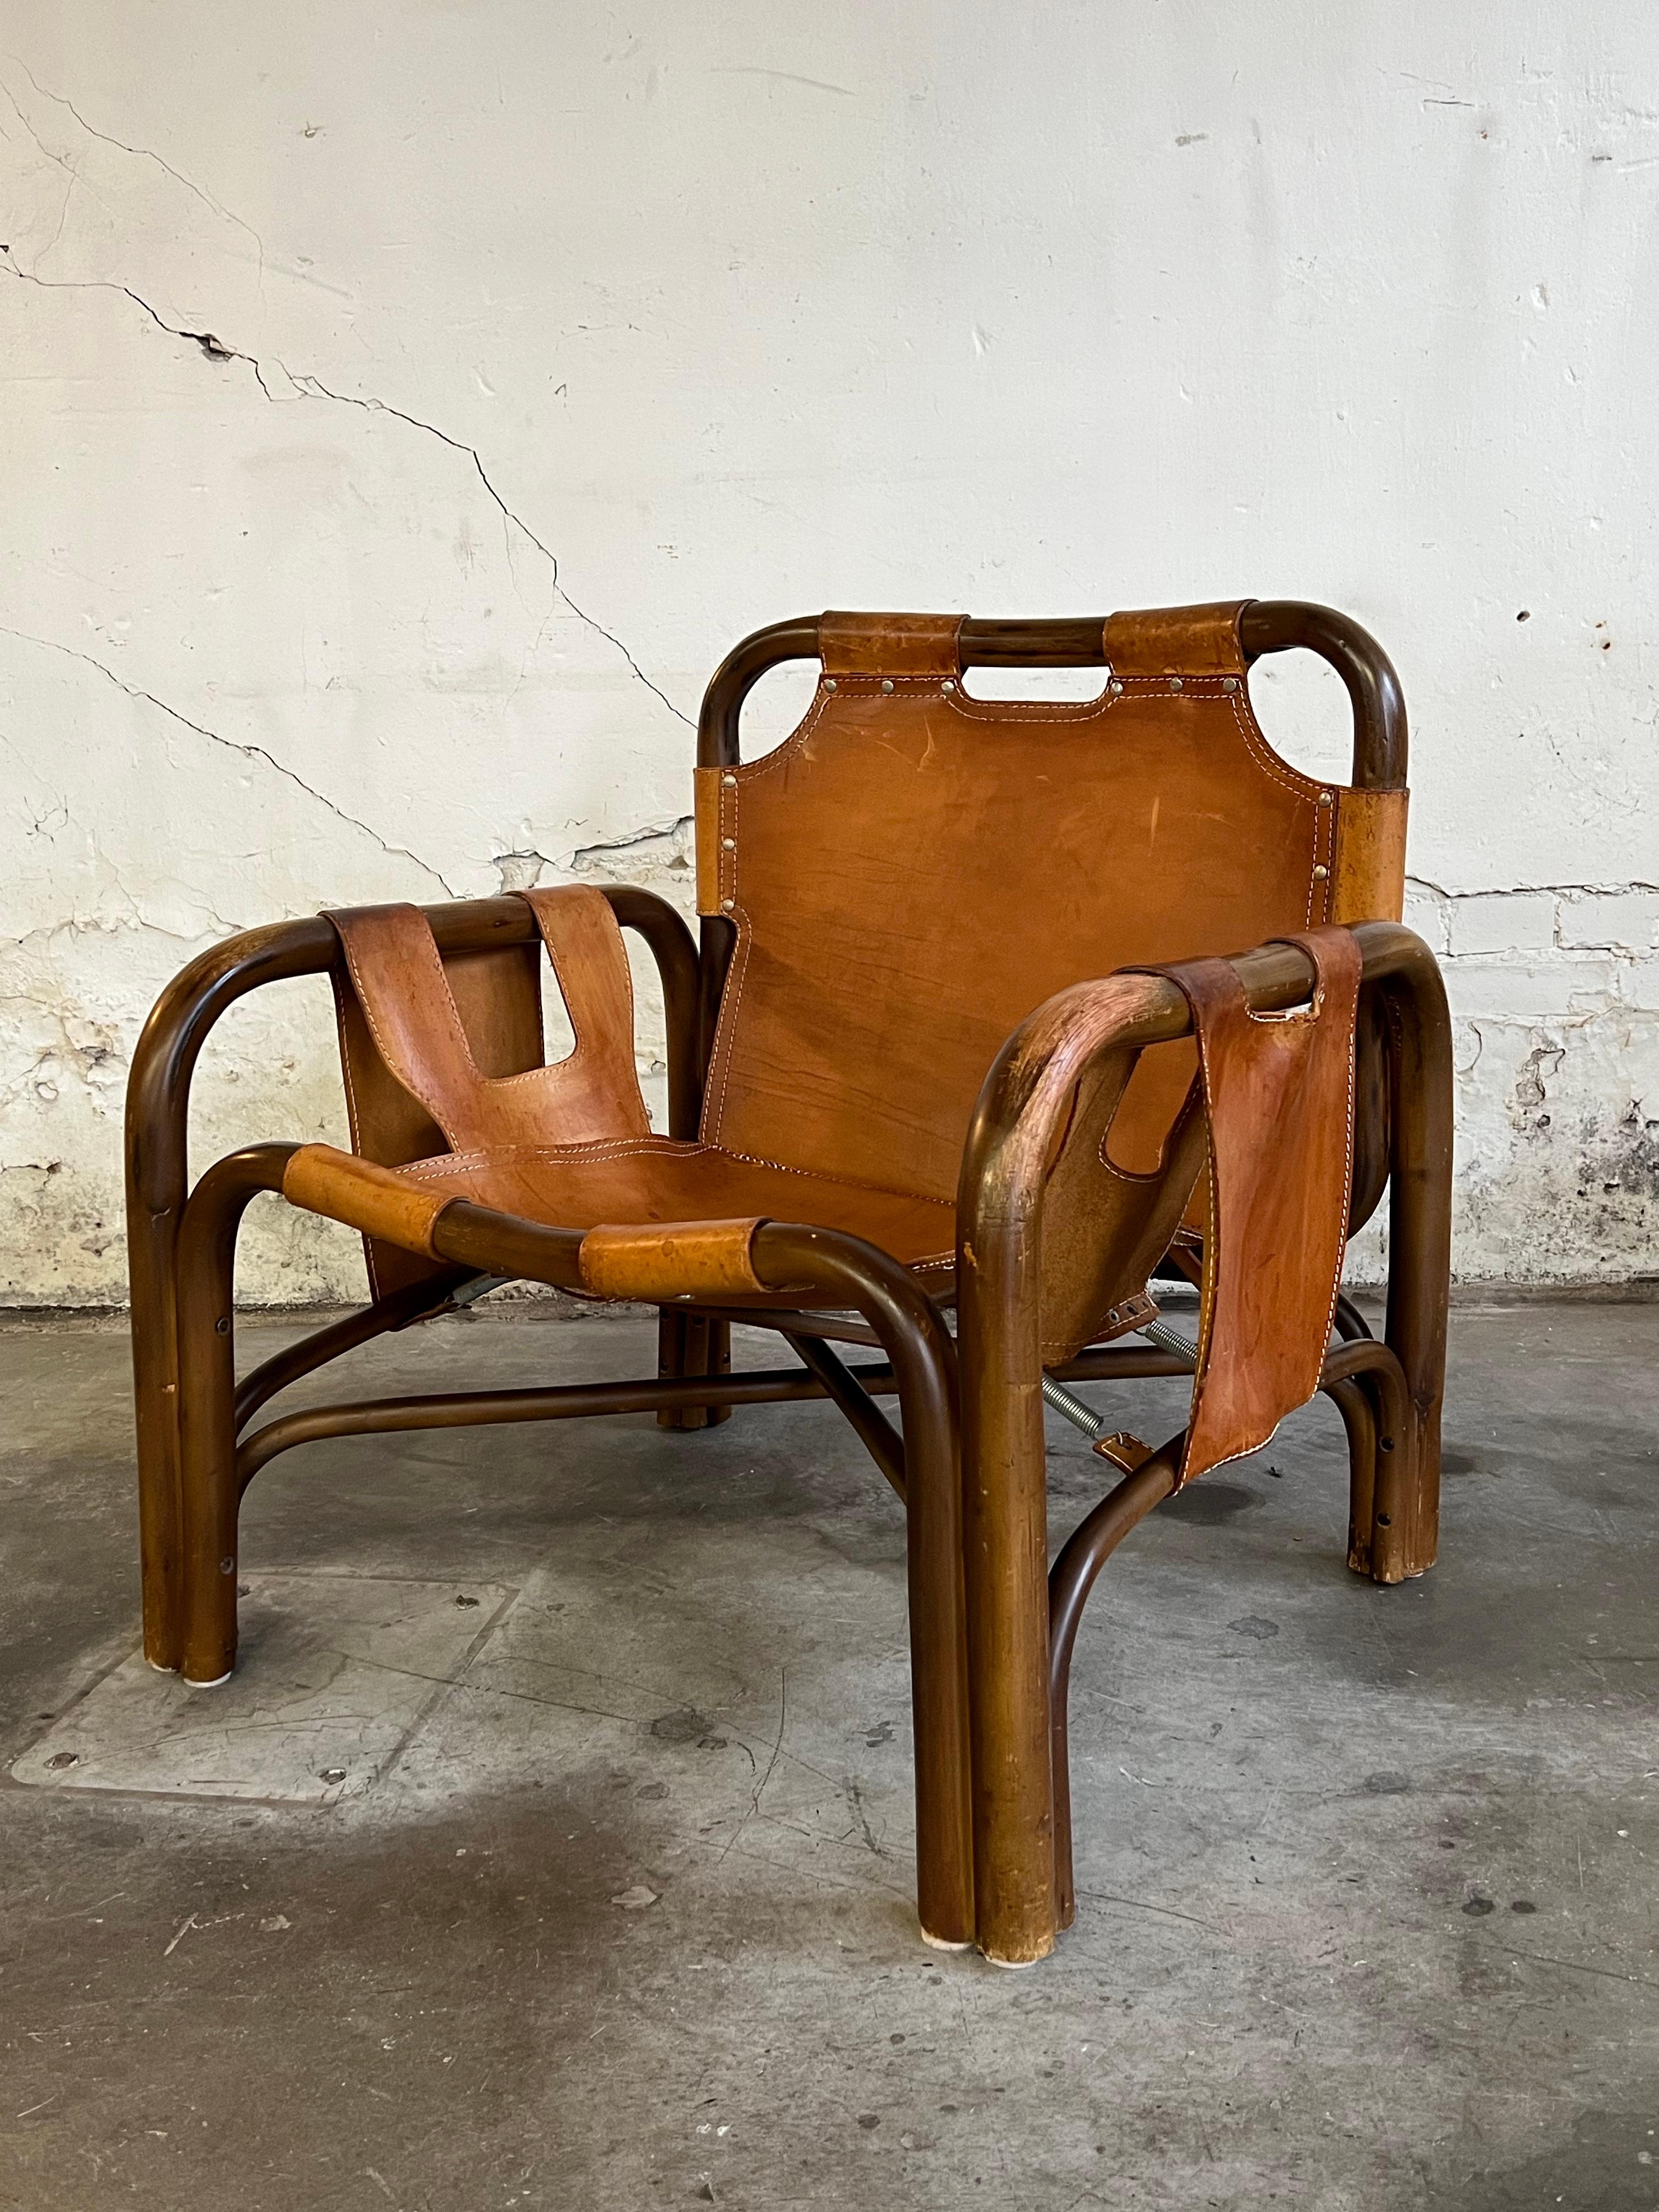 Interesting arm chair in bamboo (Manou) with cognac coloured saddle leather. This 'Safari' chair does not often come for sale and certainly not in this stunning condition. Designed by Tito Agnoli and manufactured in Italy in 1960.